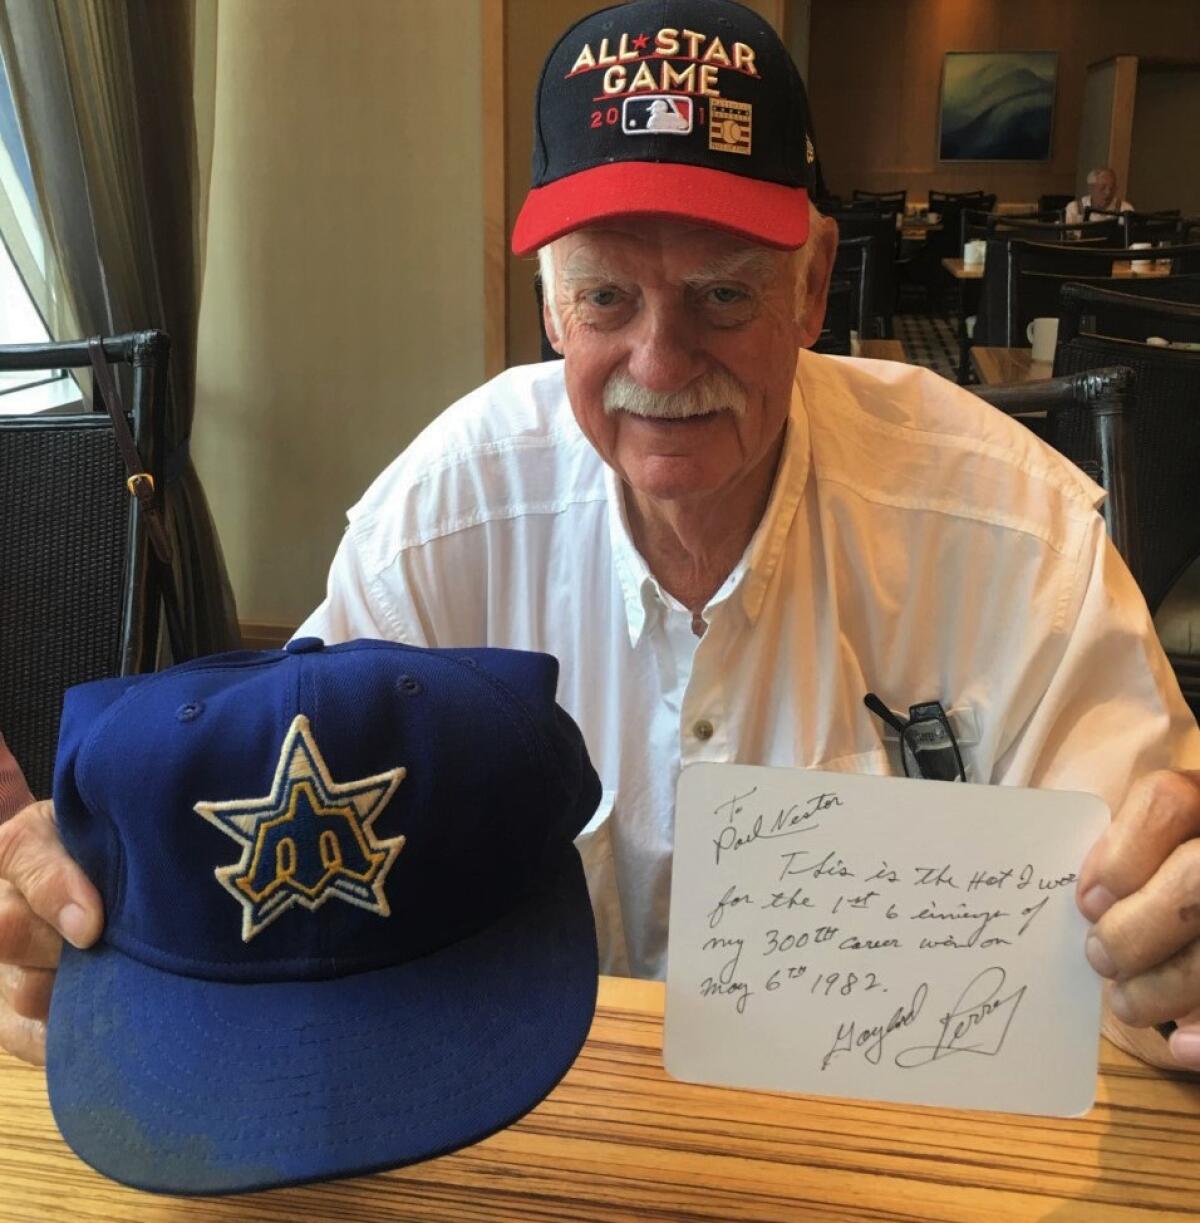 In 2016, pitcher Gaylord Perry displayed the hat he wore pitching his 300th winning game in 1982 with his note to Paul Nestor